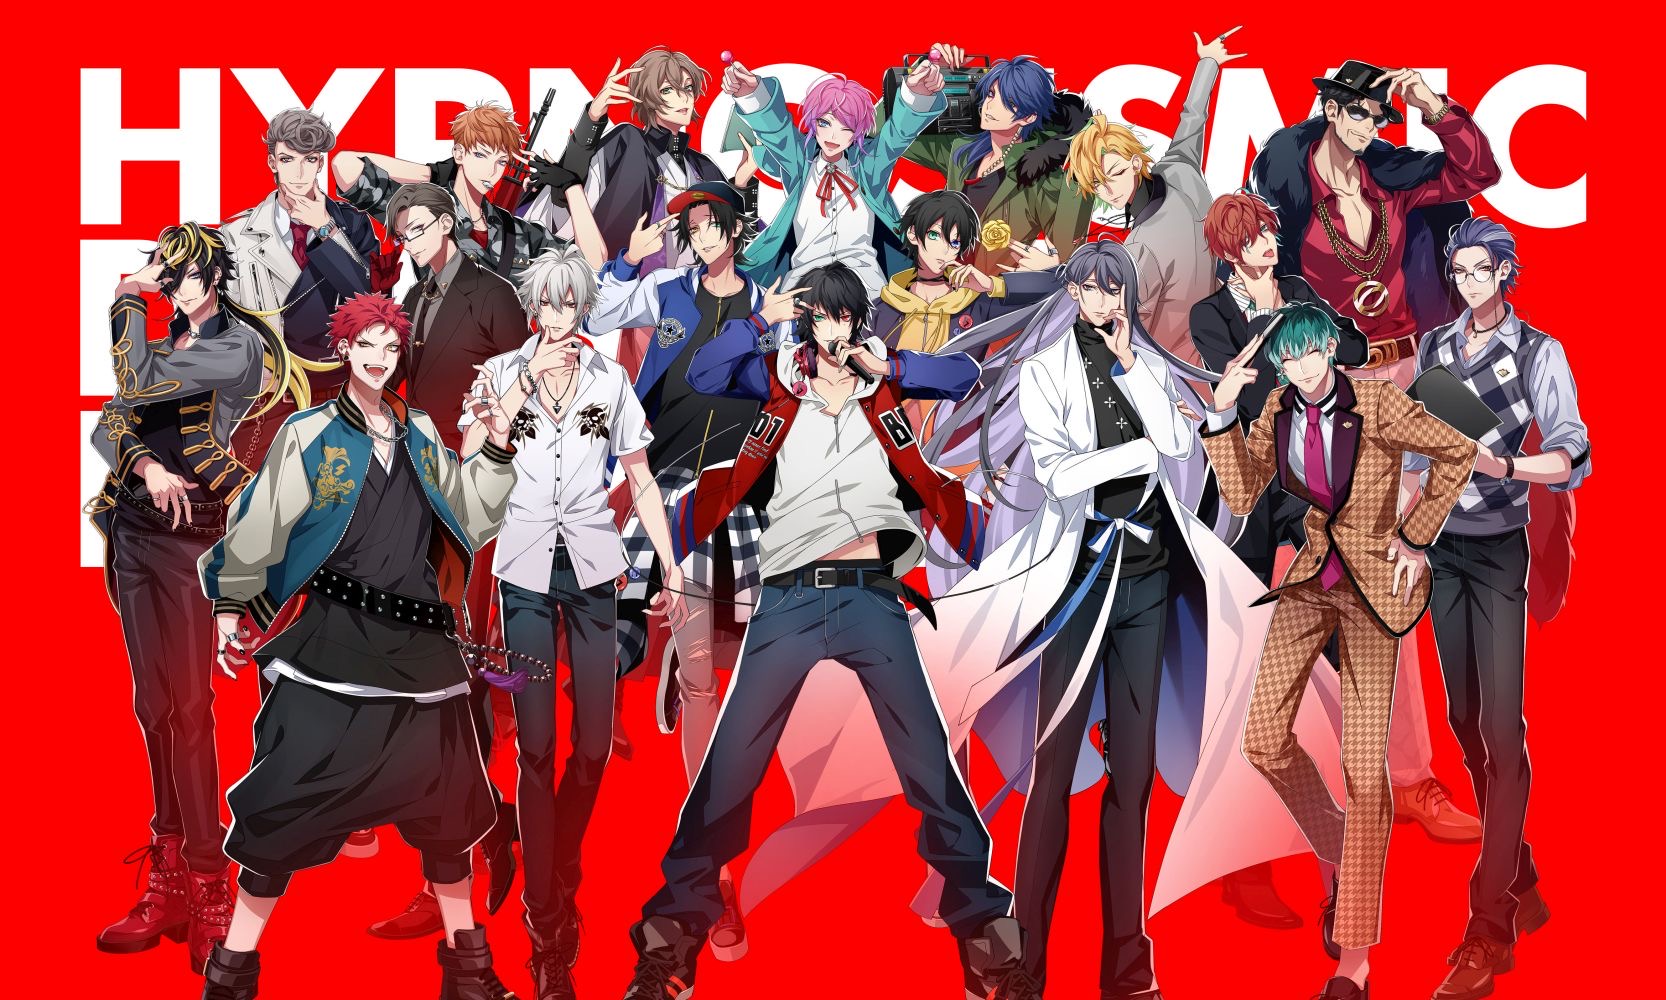 Hypnosis Mic 7th live 